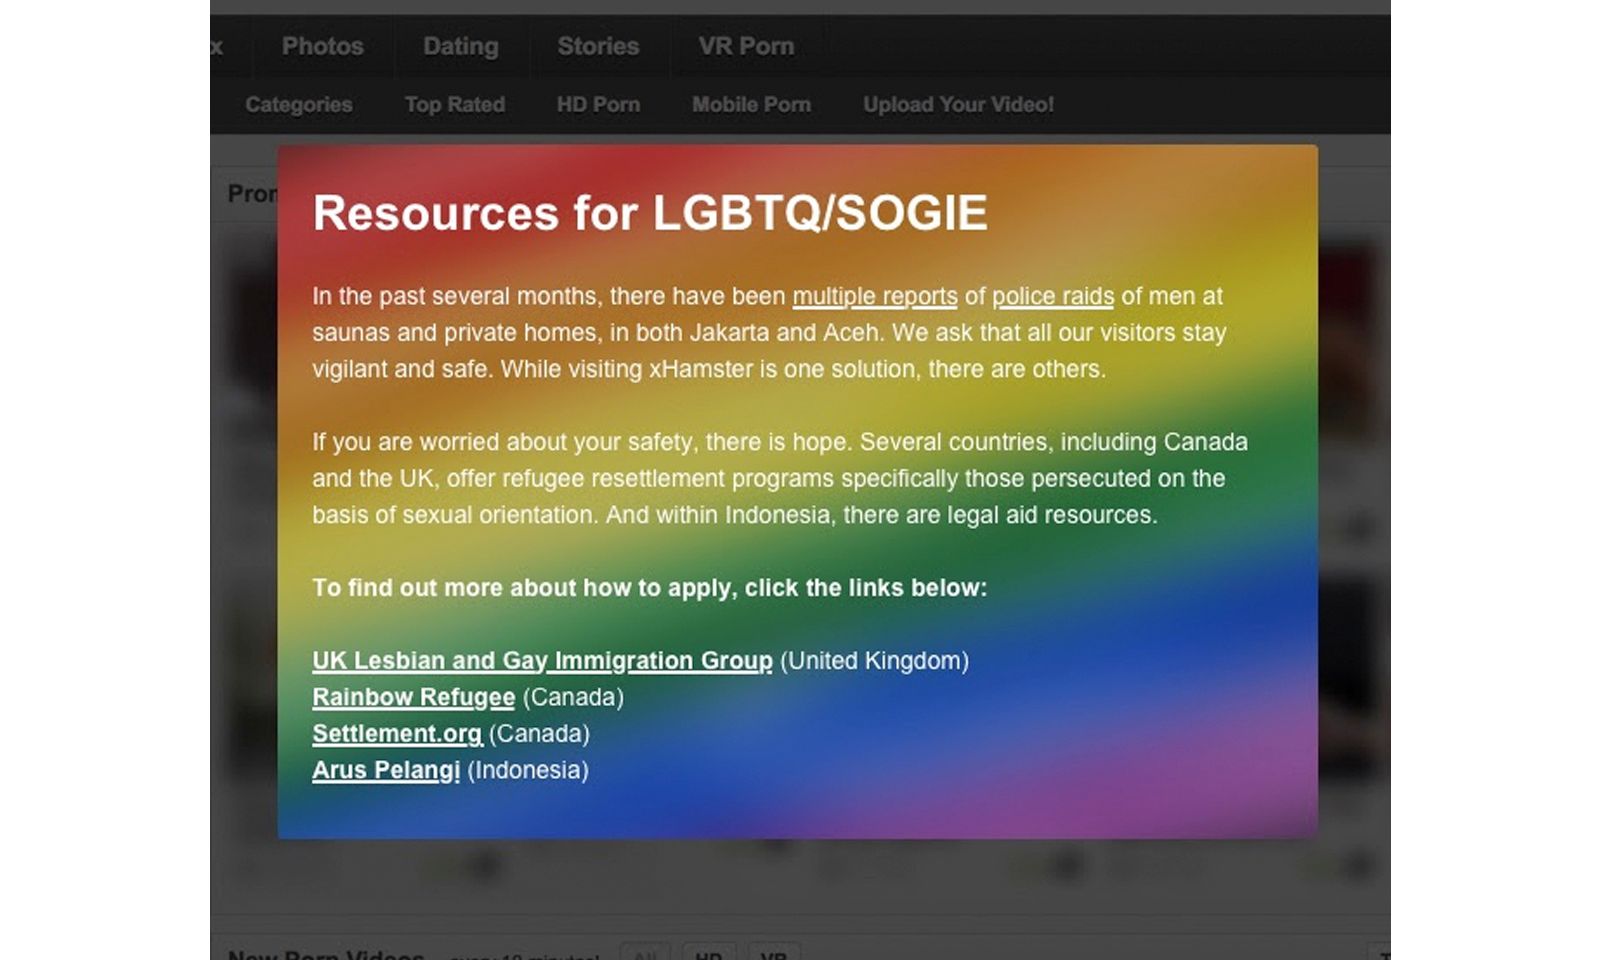 xHamster Launches Program To Connect LGBTQ Refugees To Resources